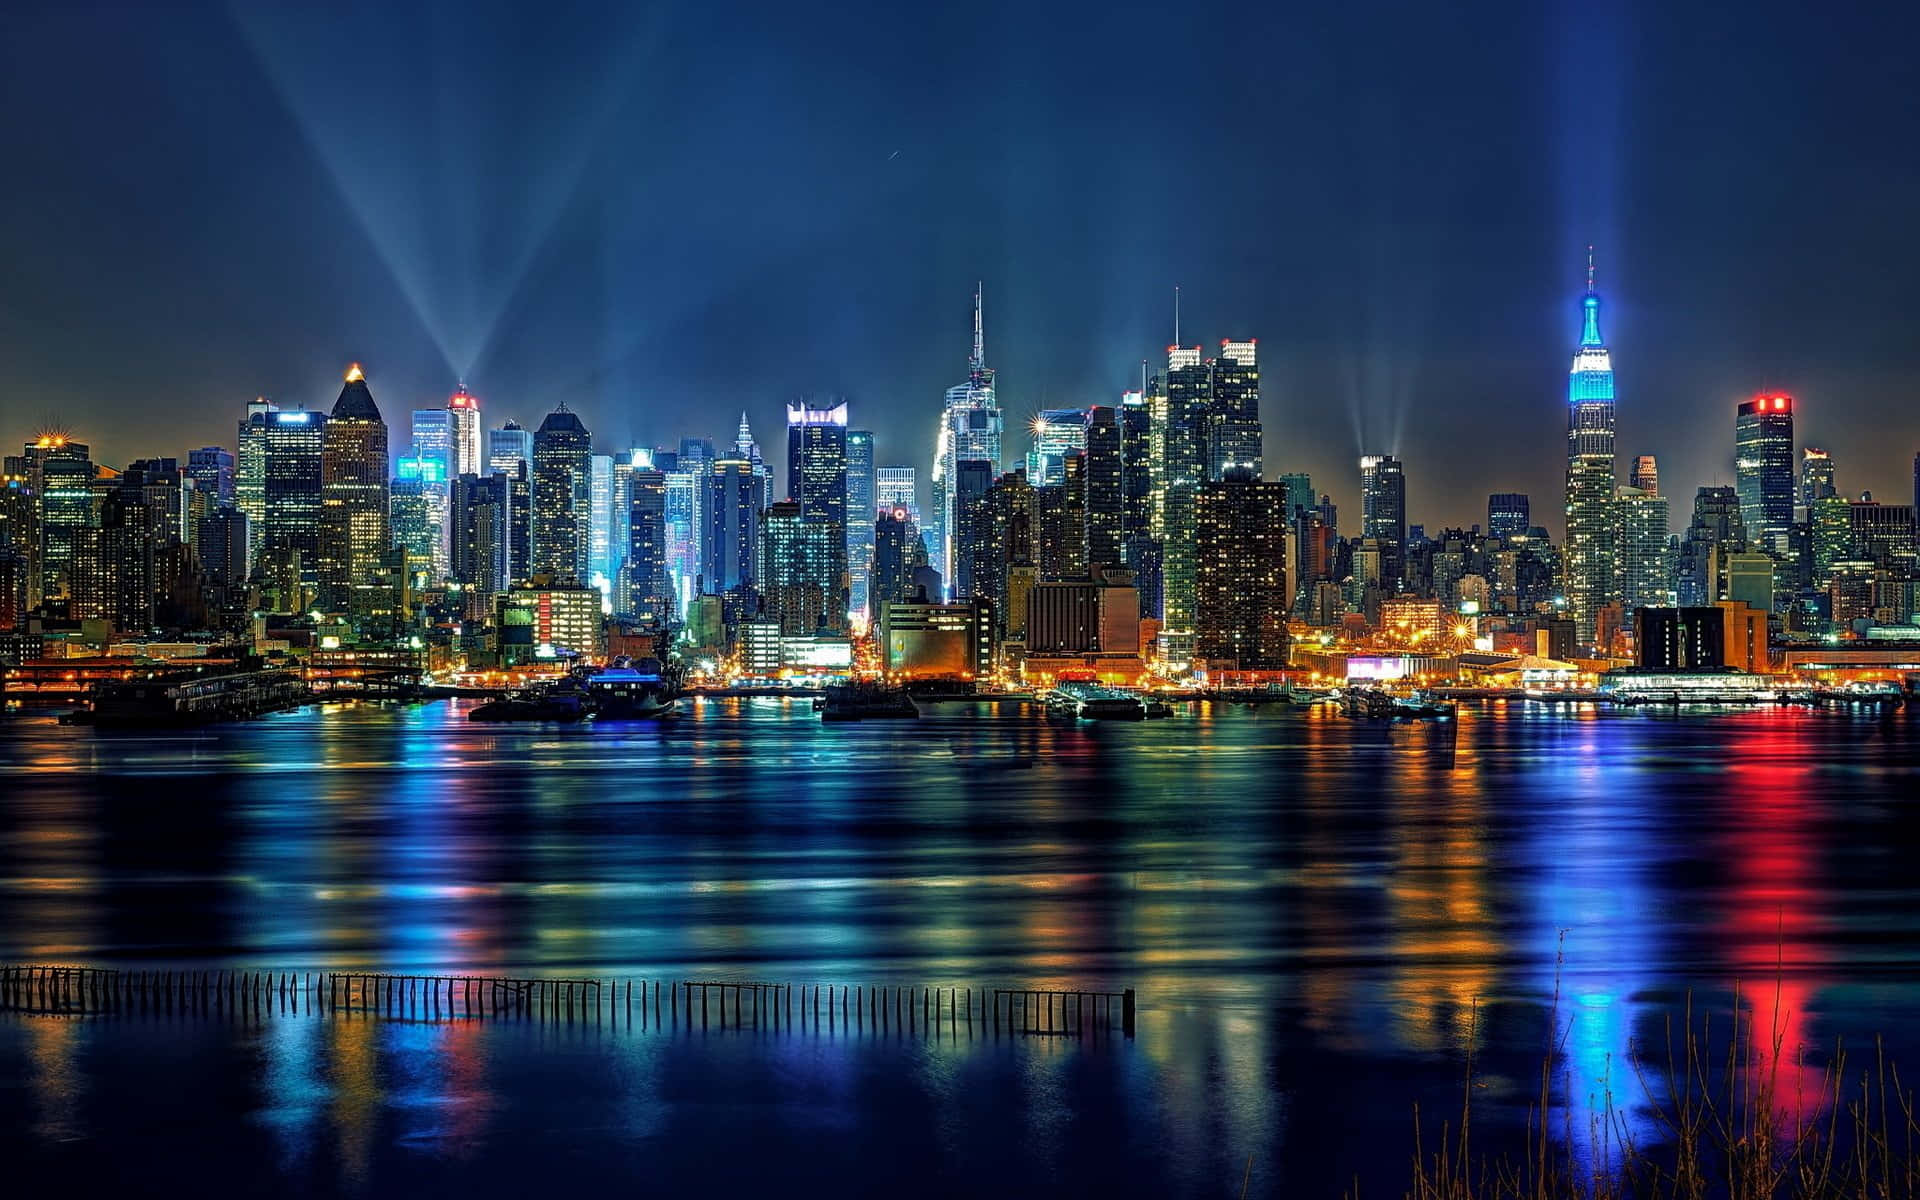 Iconic New York skyline in all its glory